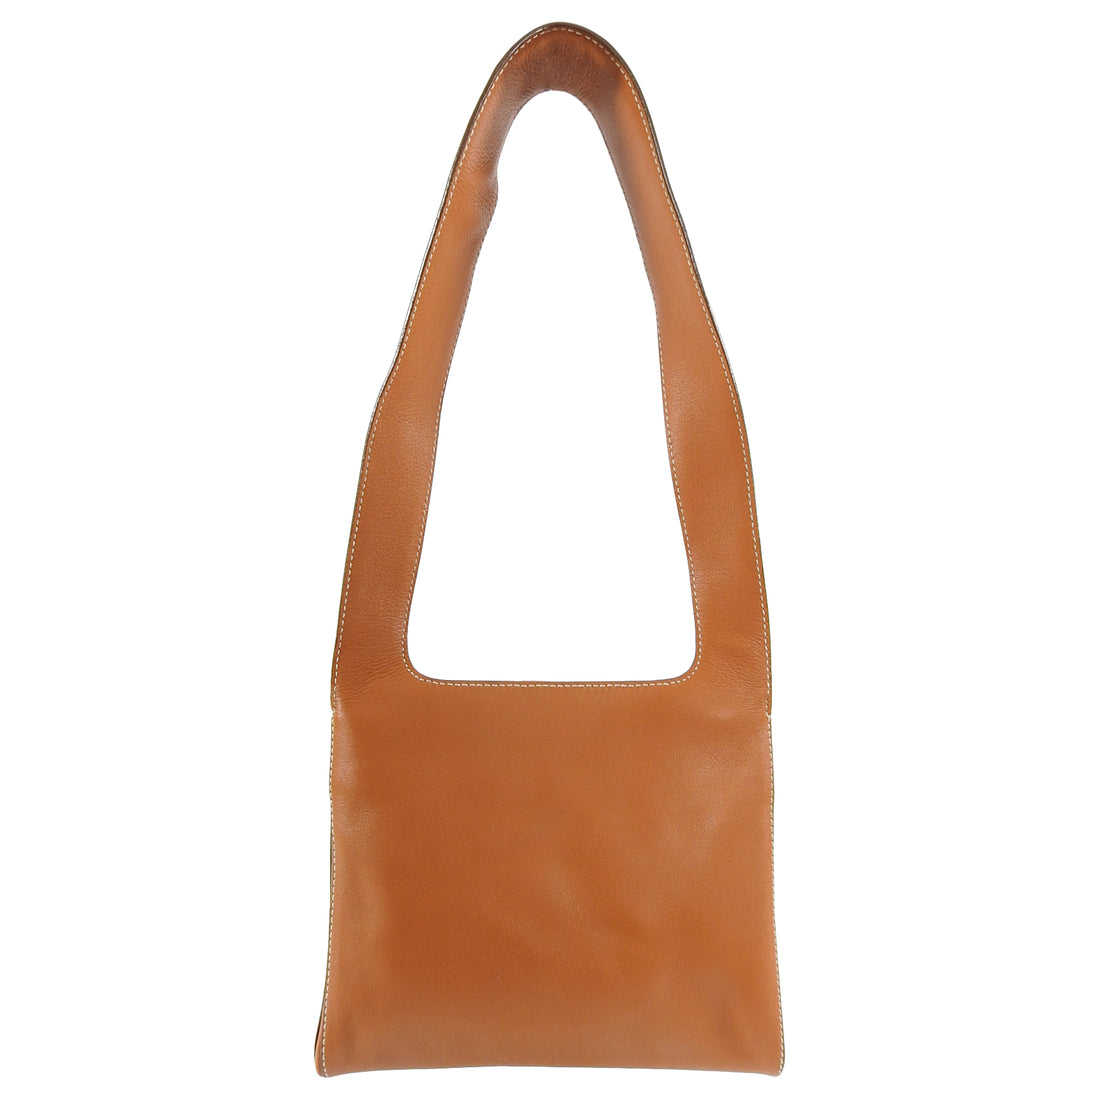 Tods Tan Small Leather Shoulder Bag